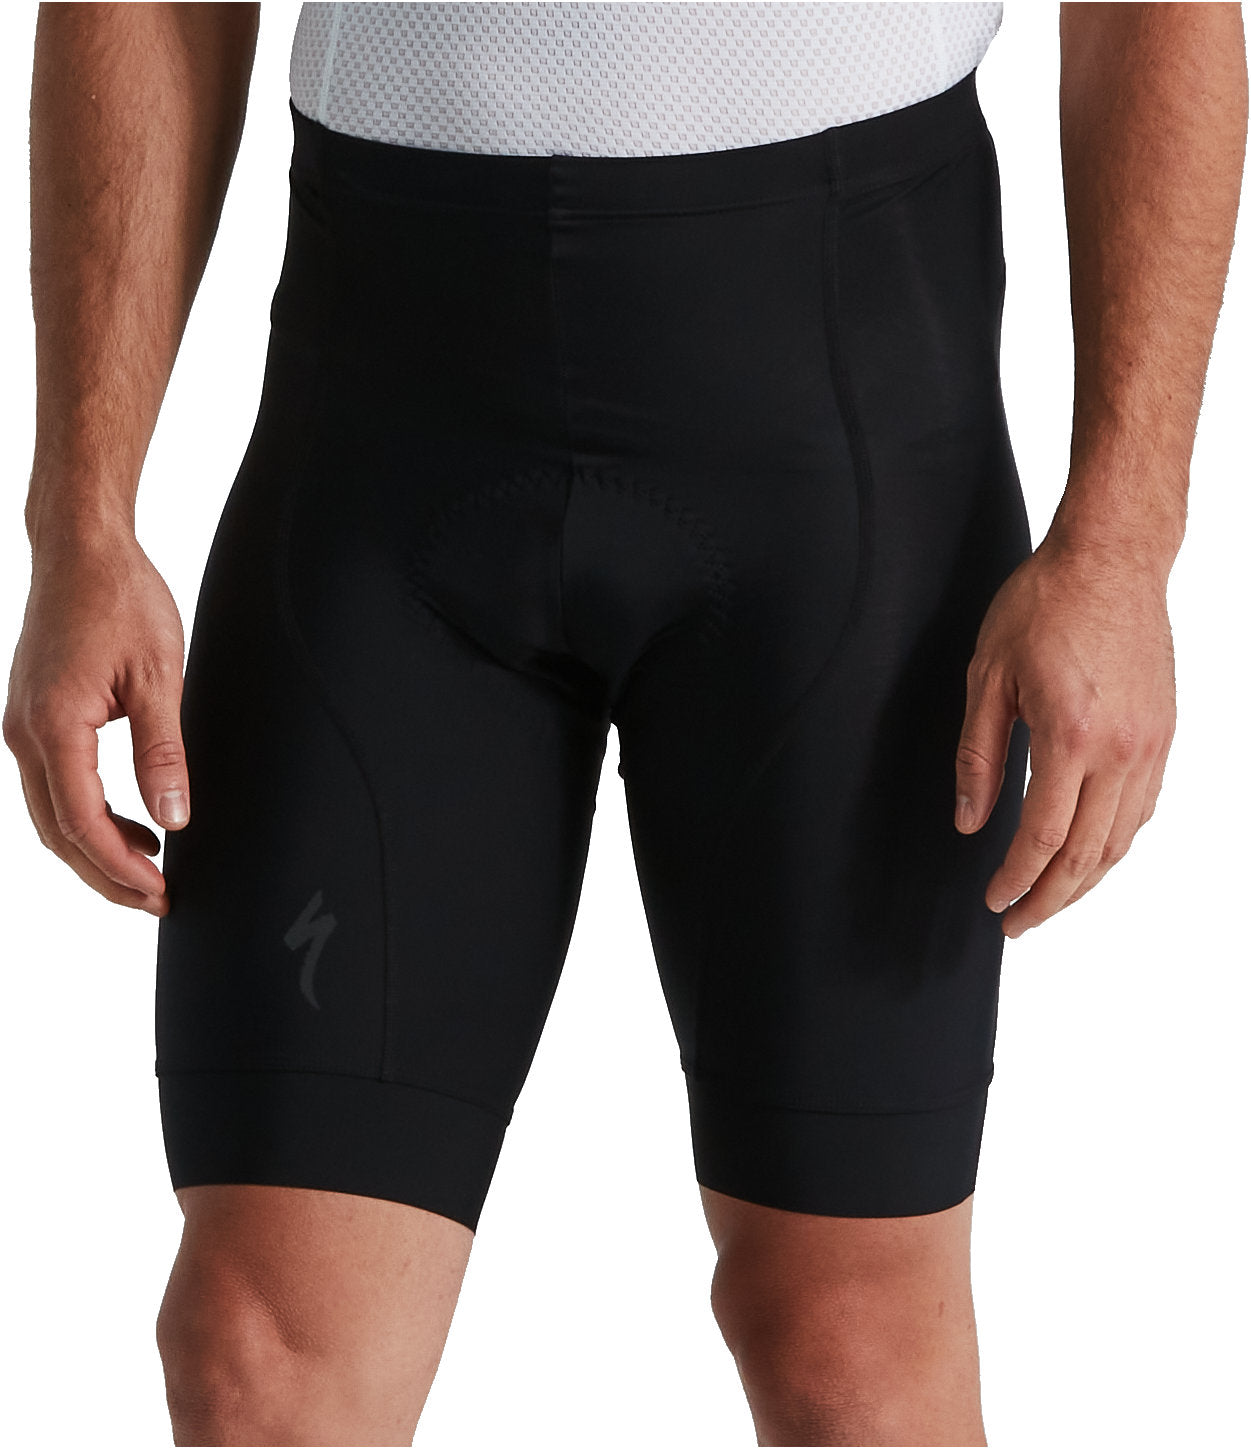 Men's Cycling Shorts & Bib Shorts | Specialized Philippines